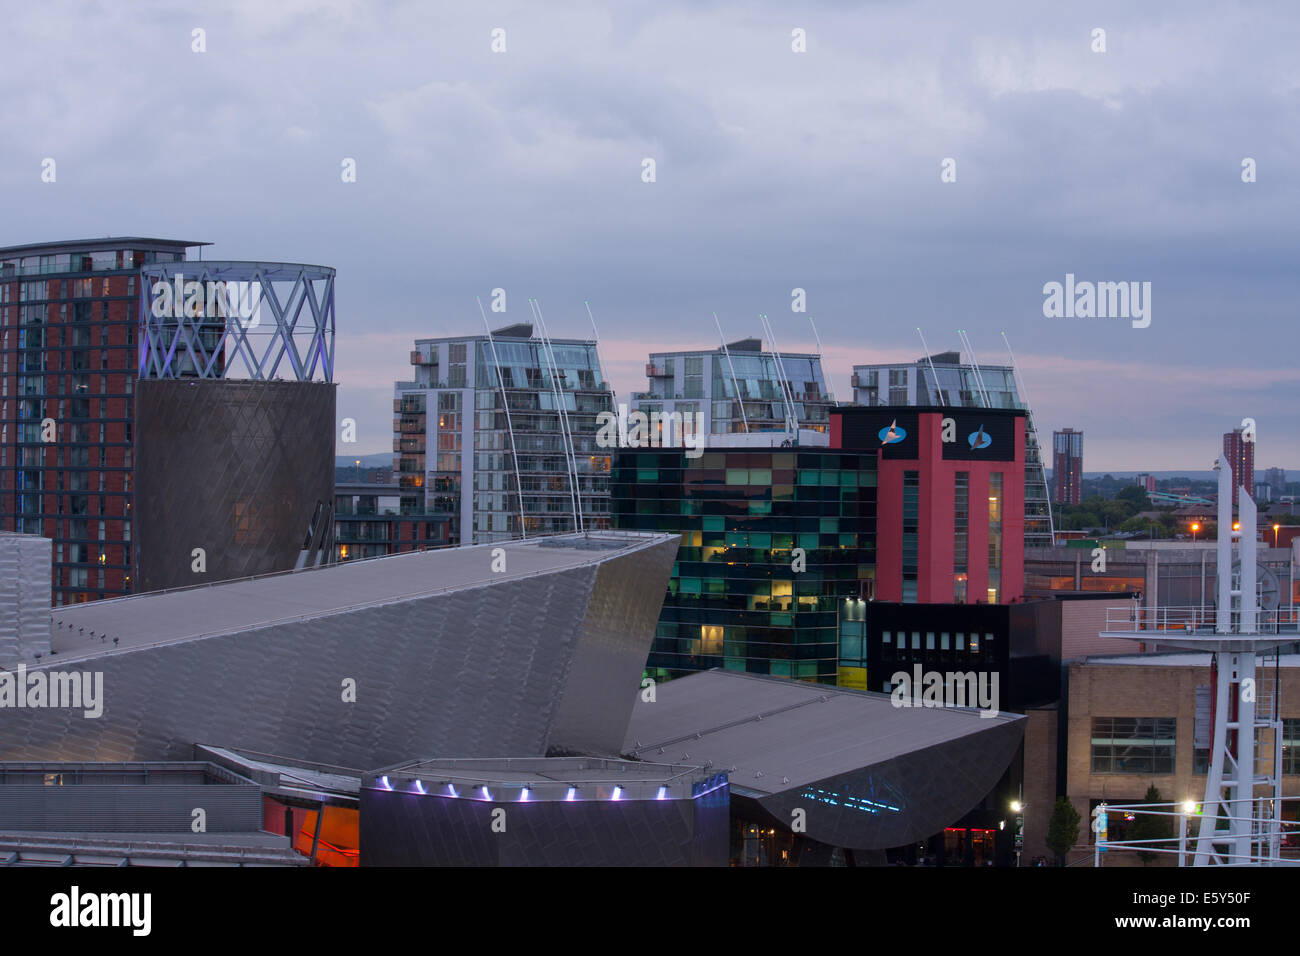 Panorama of Salford Quays and the Lowry Theatre in Manchester, UK at dusk, shot from the top of Quay West. Stock Photo